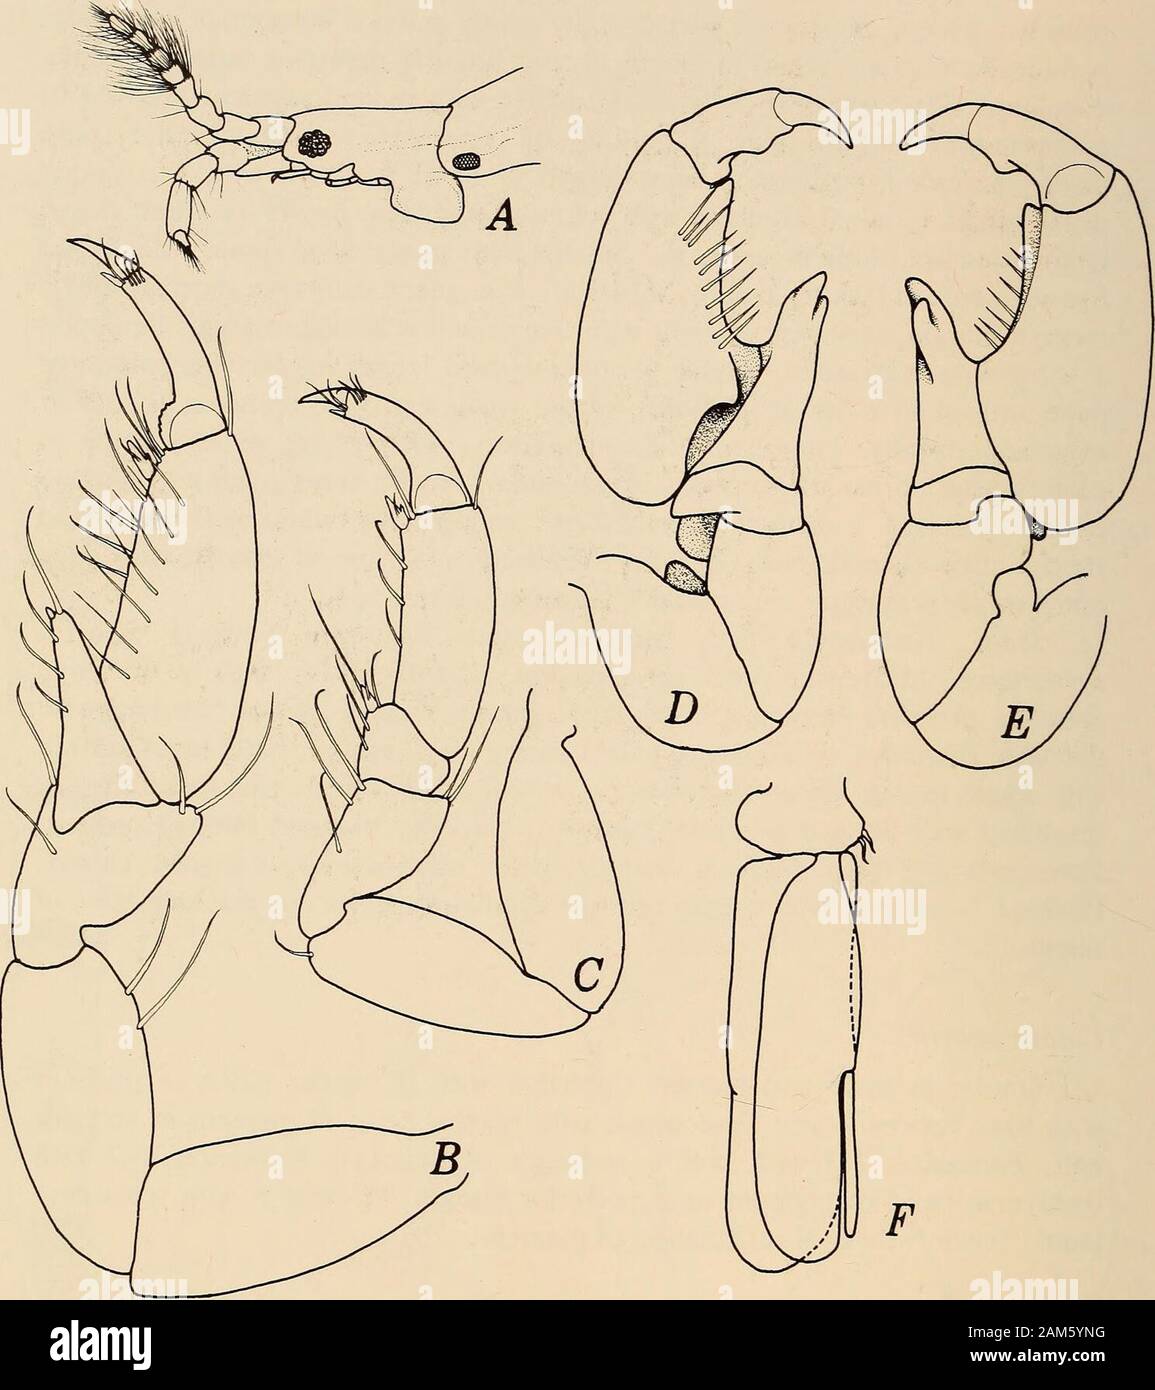 Annals of the South African Museum = Annale van die Suid-Afrikaanse Museum . roduced well beyond propodal base into narrowly rounded bilobed process.Pereopods 2-3 with dactylus meeting distal extension of triangular carpus.Pleopod 2 endopod with simple rod-like copulatory stylet not reaching apex oframus. Colour pattern Similar in male and female. Cephalon with triangular patch of pigmentwith base between eyes. Pereonite 1 with narrow hoop of pigment in anteriorhalf. Pereonites 2-3 with hollow rectangle of pigment. Pereonites 4-7 withtransverse band of pigment near posterior margin. Pleonite 6 Stock Photo